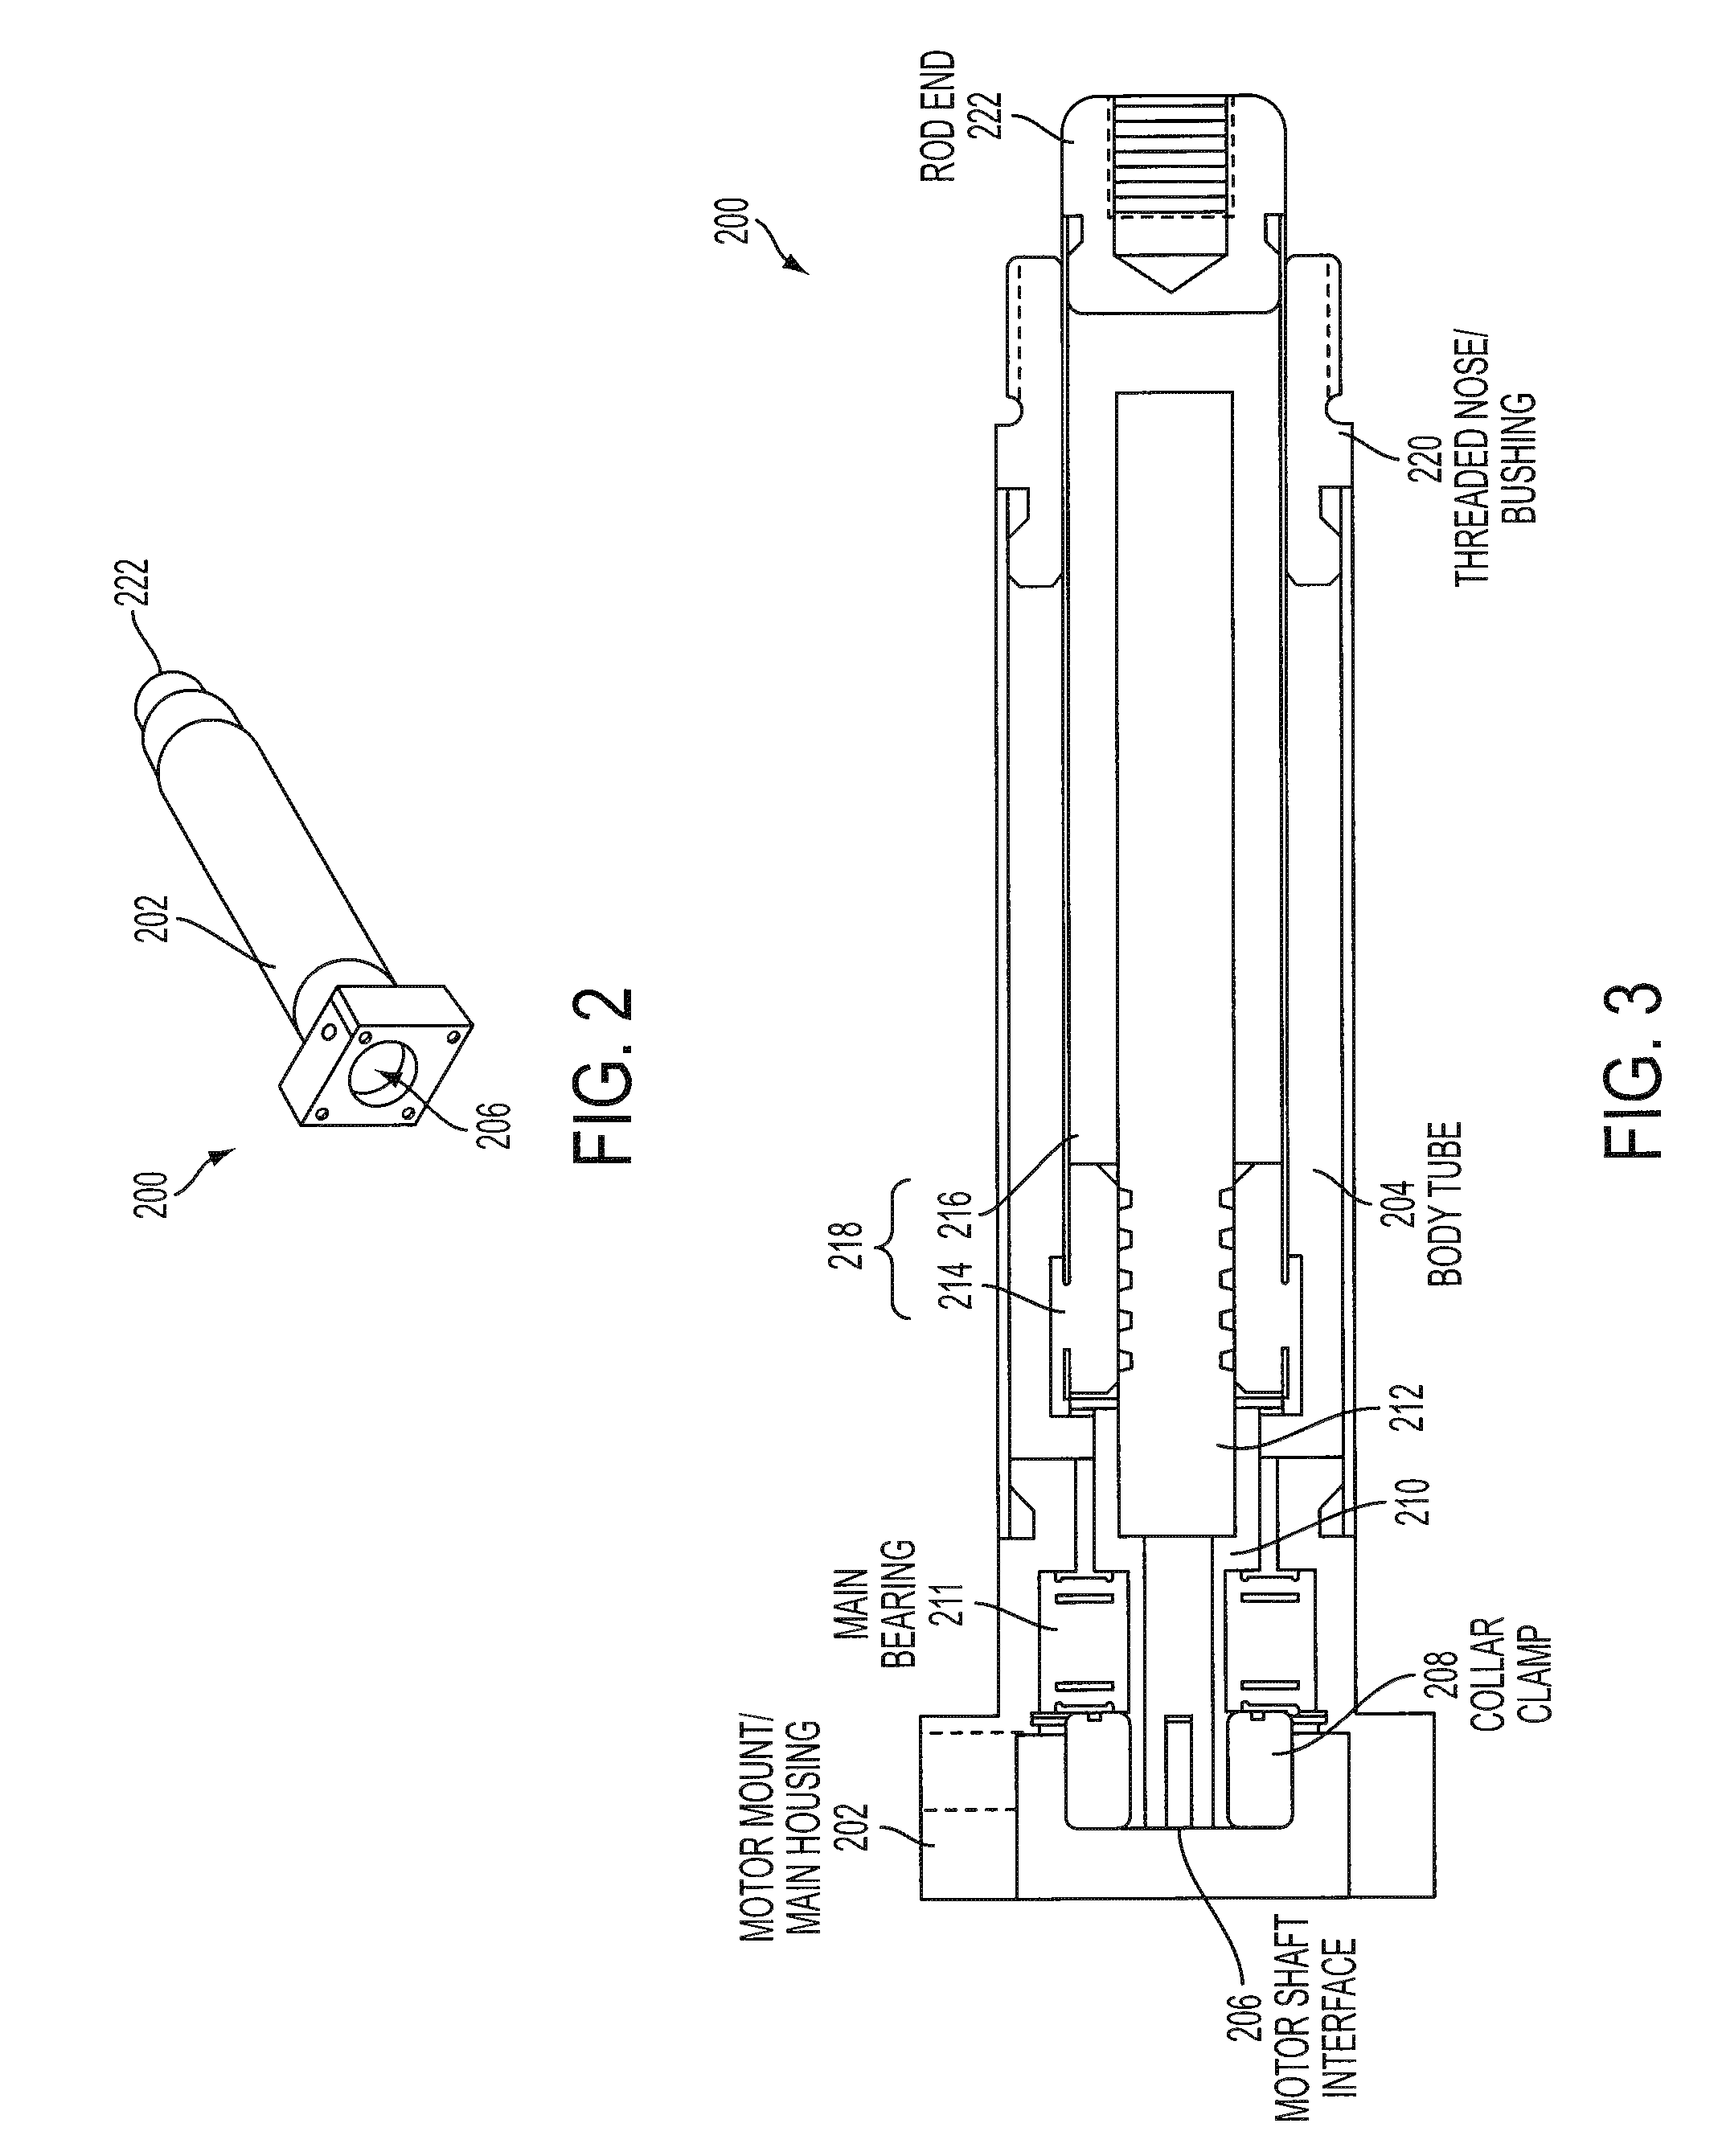 Method for manufacturing a linear actuator